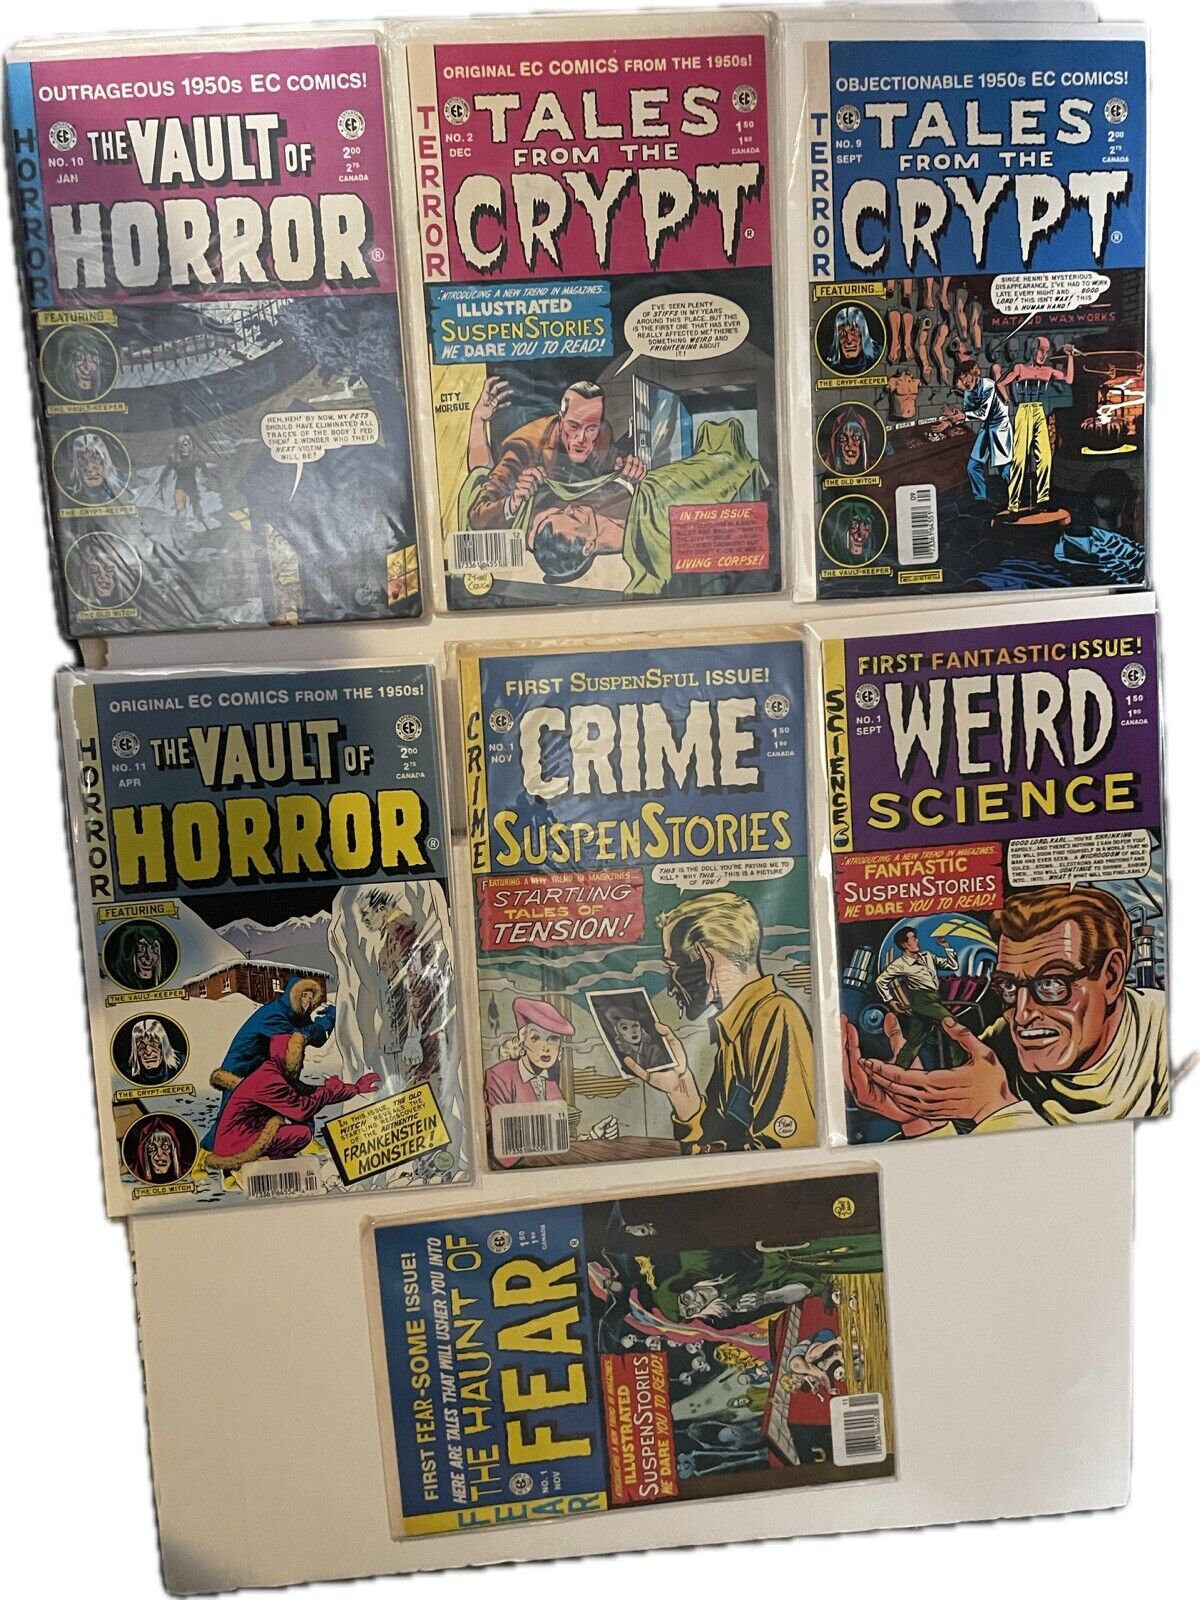 Lot of 7 The Vault of Horror , Tales From The Crypt ETC. EC Comics Reprint 1950S